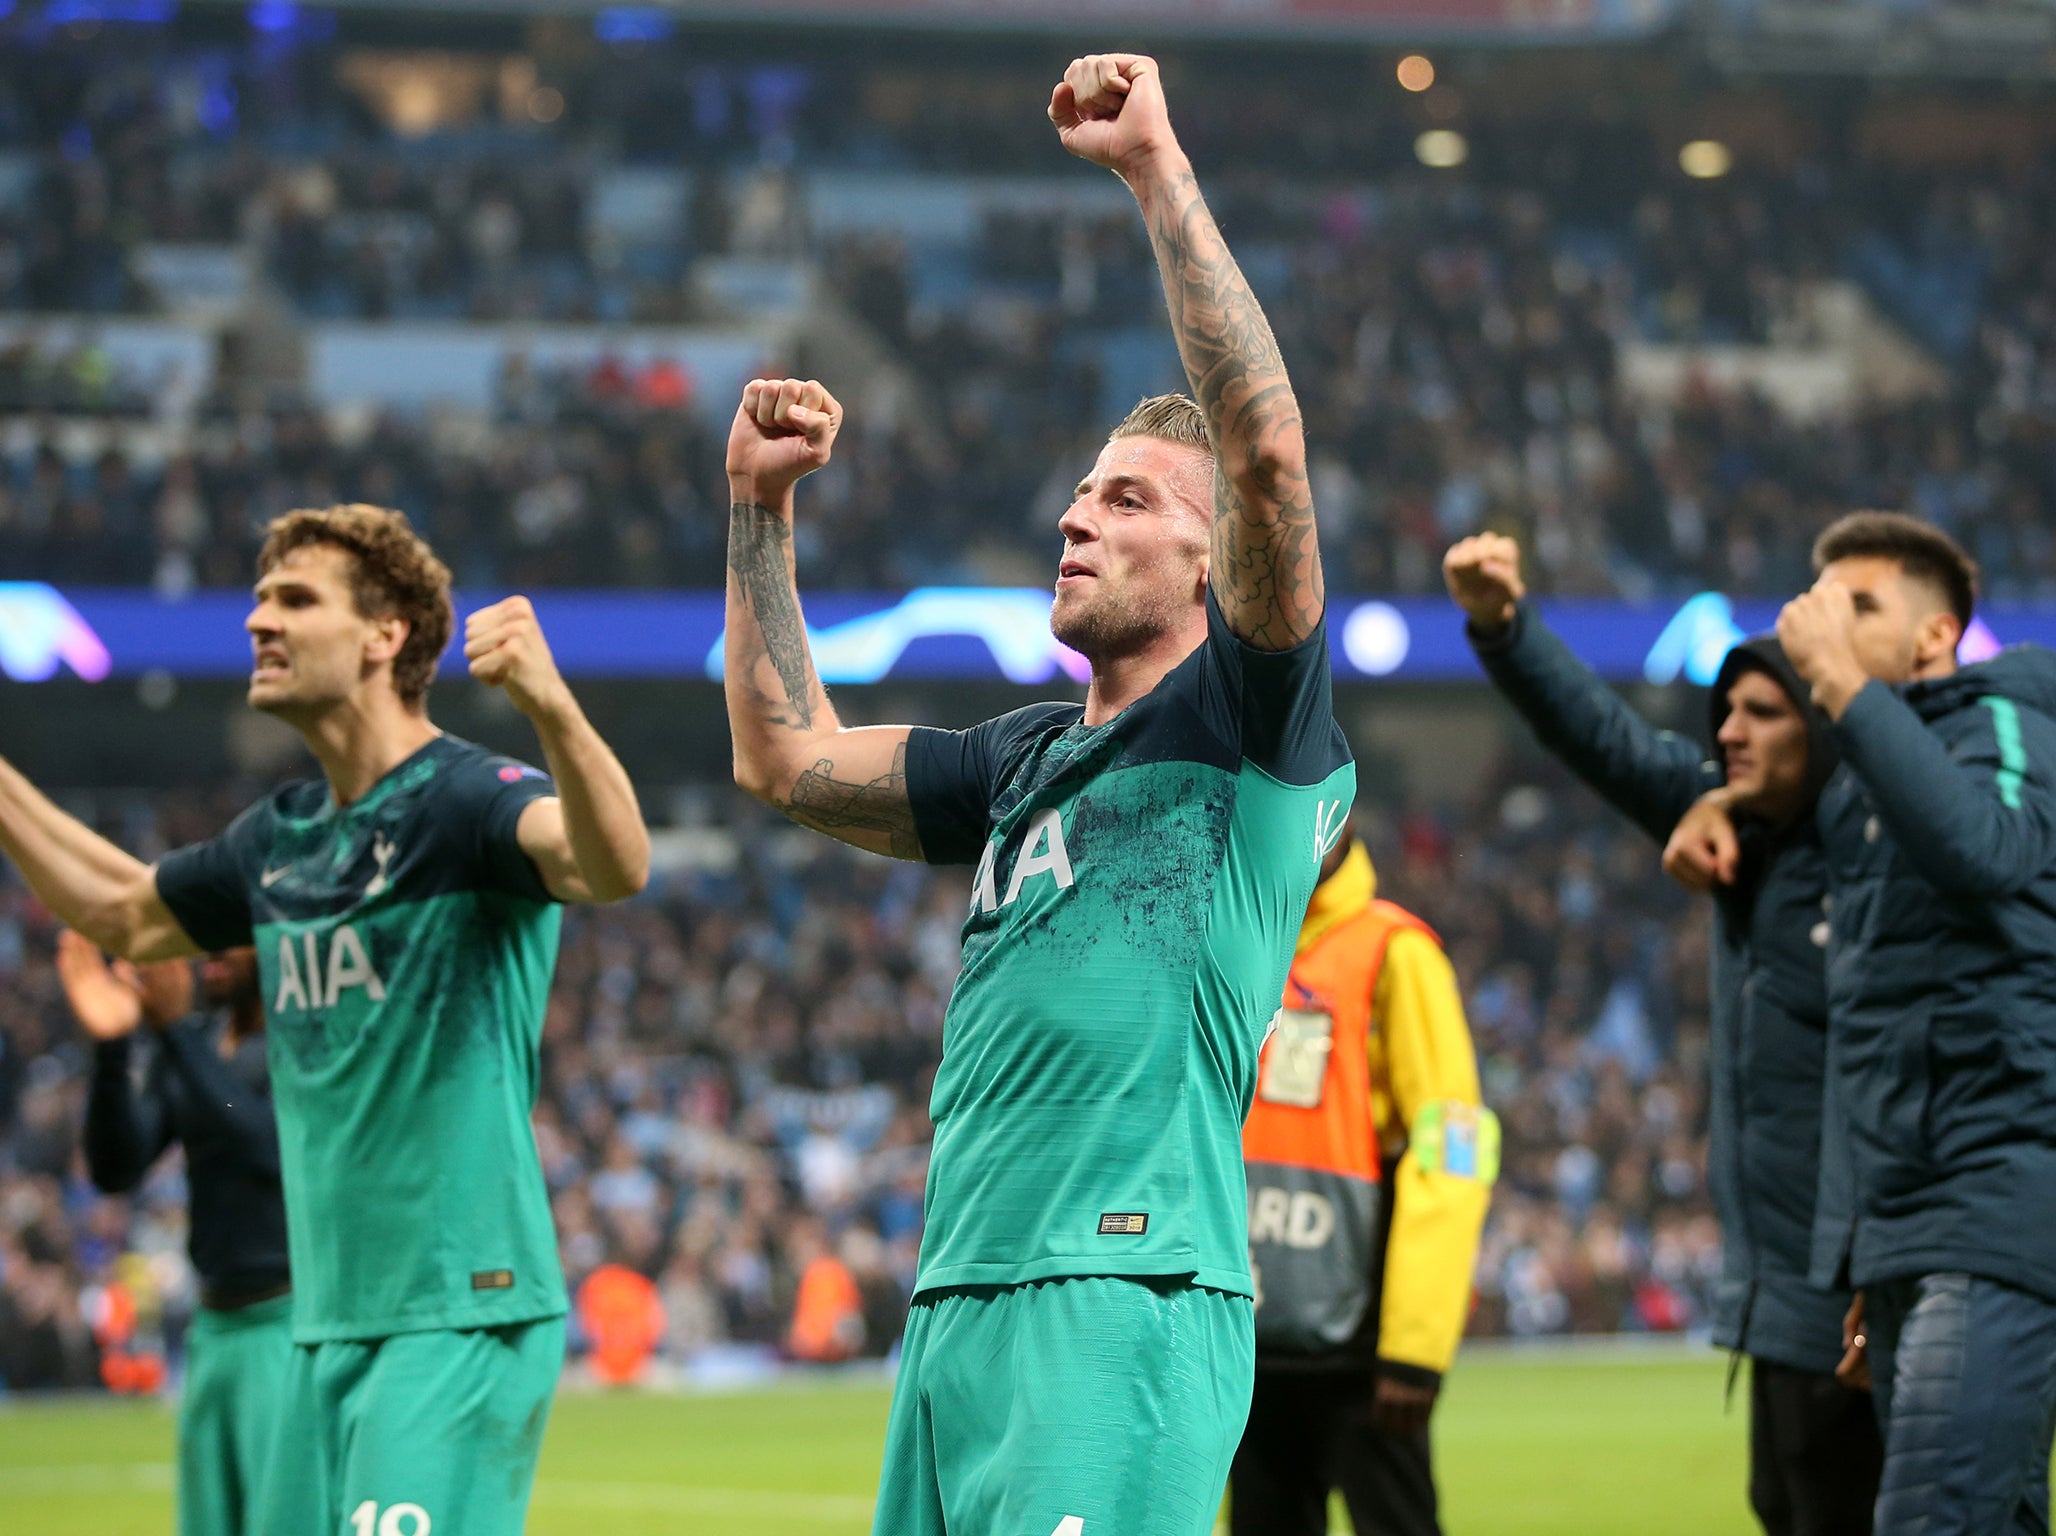 Tottenham vs Ajax Champions League semi-final: When is it and what players are suspended?